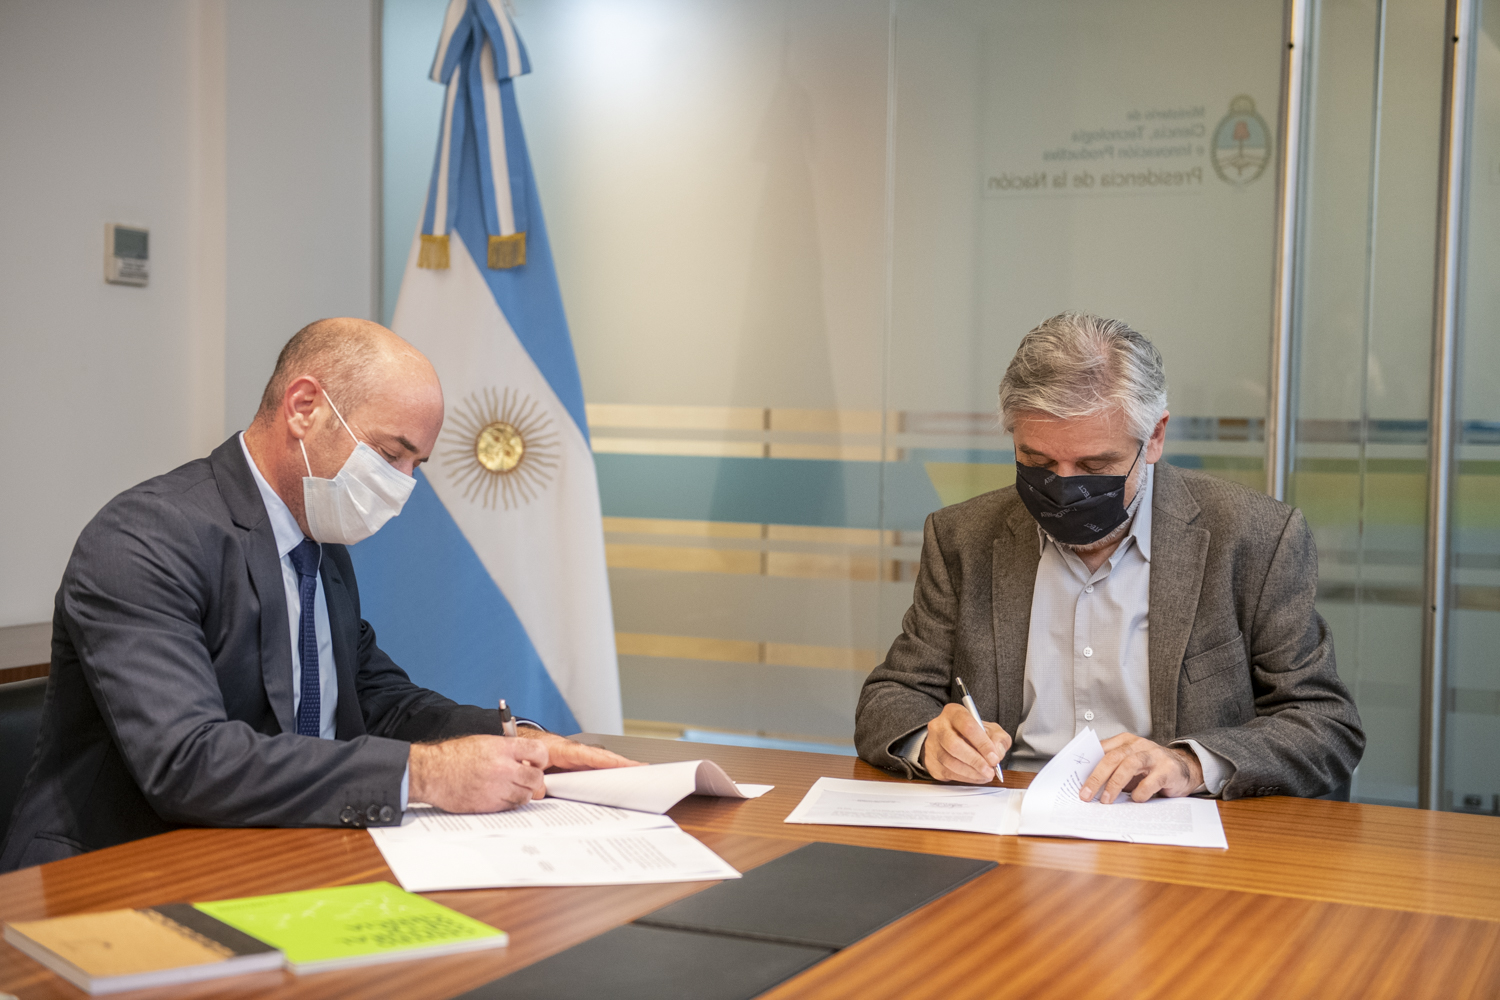 The Ministry of Science and the Ministry of Education of the Province of Tucumán have signed an agreement so that the interactive exhibition “Lugar a Dudas” will participate in EDUCATEC